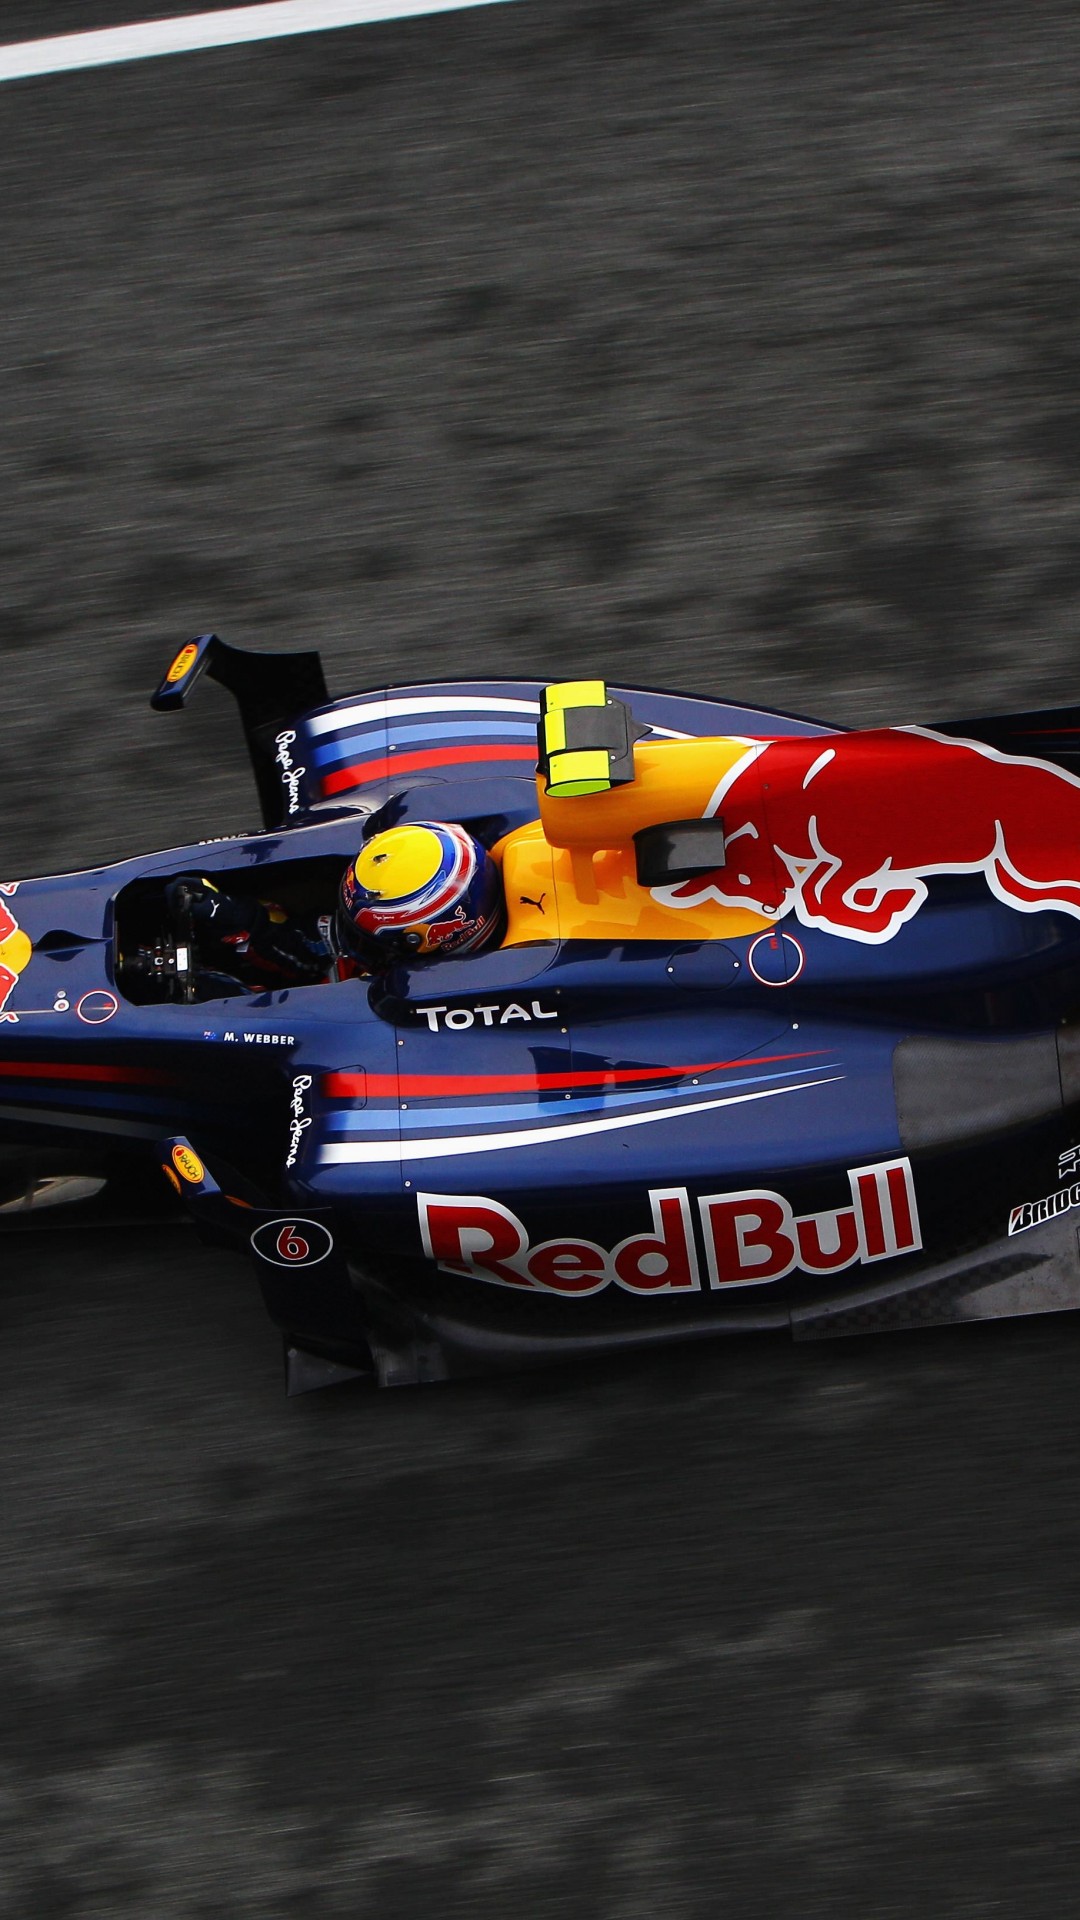 F1 Red Bull Team Wallpaper for SAMSUNG Galaxy Note 3